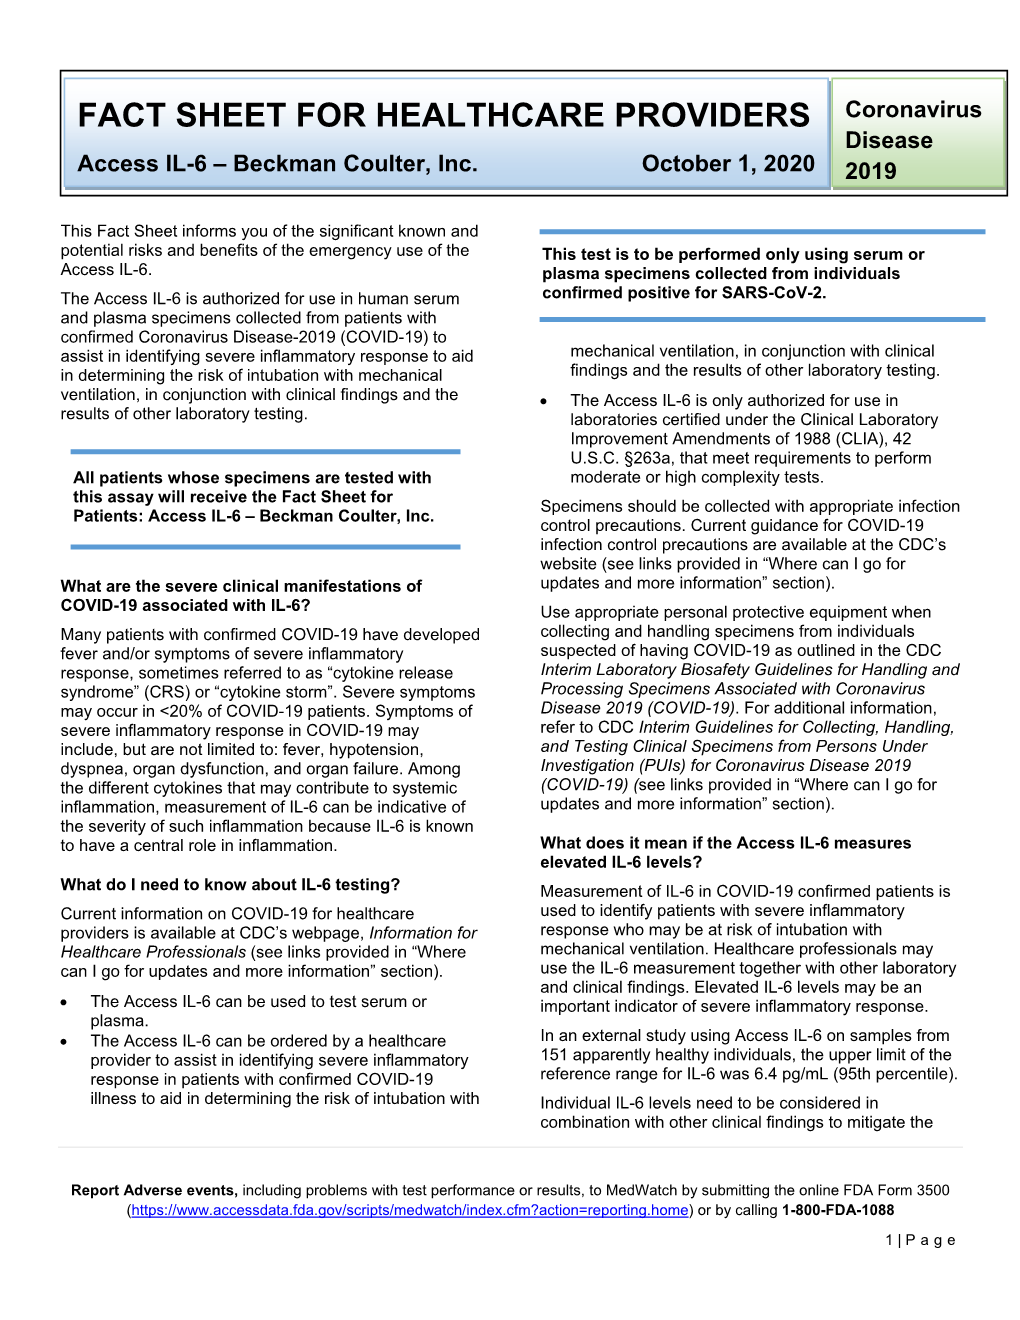 FACT SHEET for HEALTHCARE PROVIDERS Coronavirus Disease Access IL-6 – Beckman Coulter, Inc